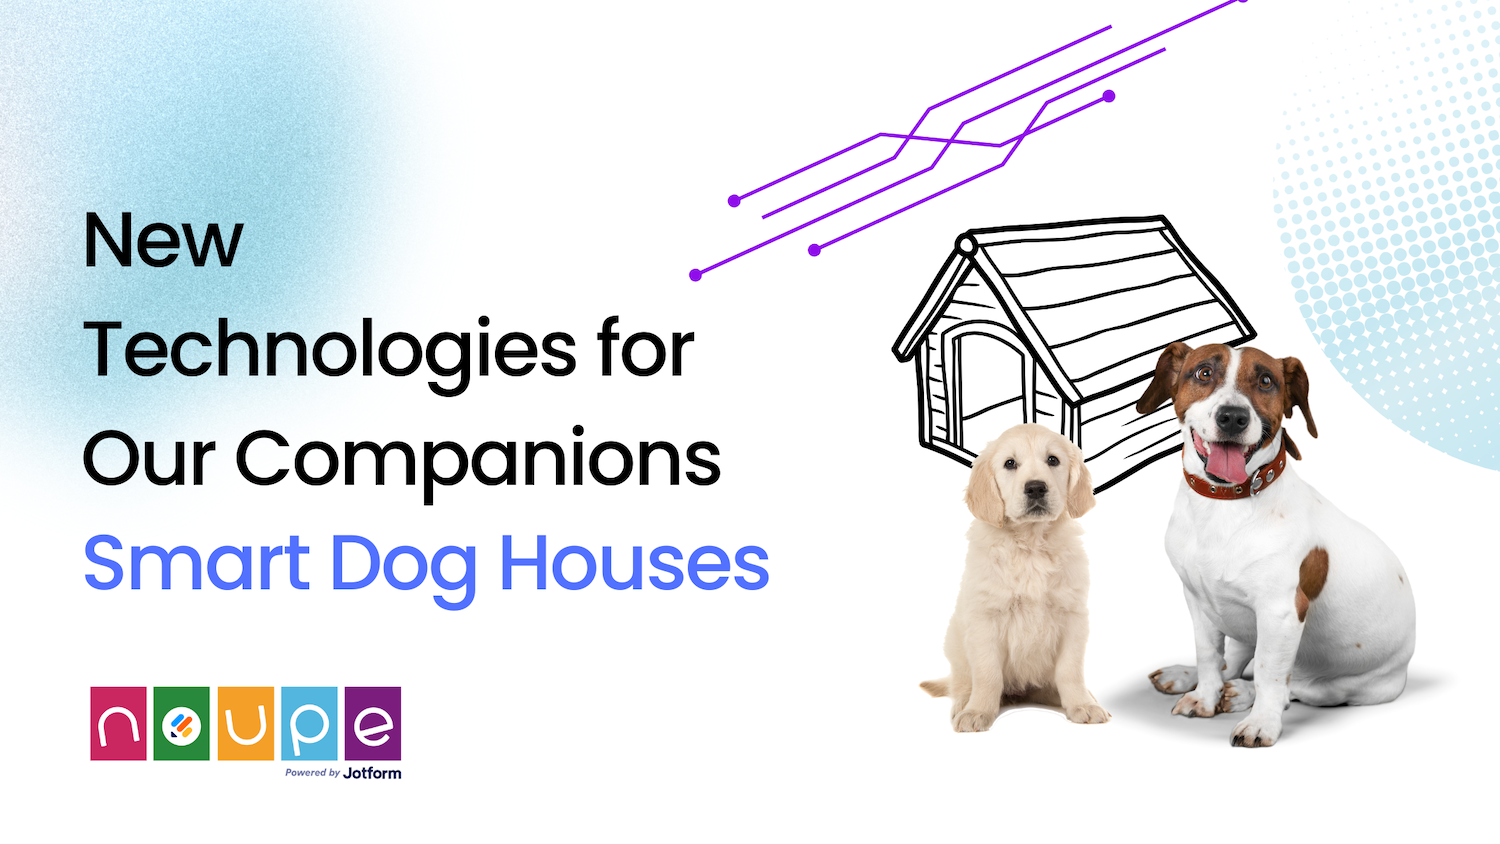 #Smart Dog Houses: New Technologies for Dogs 